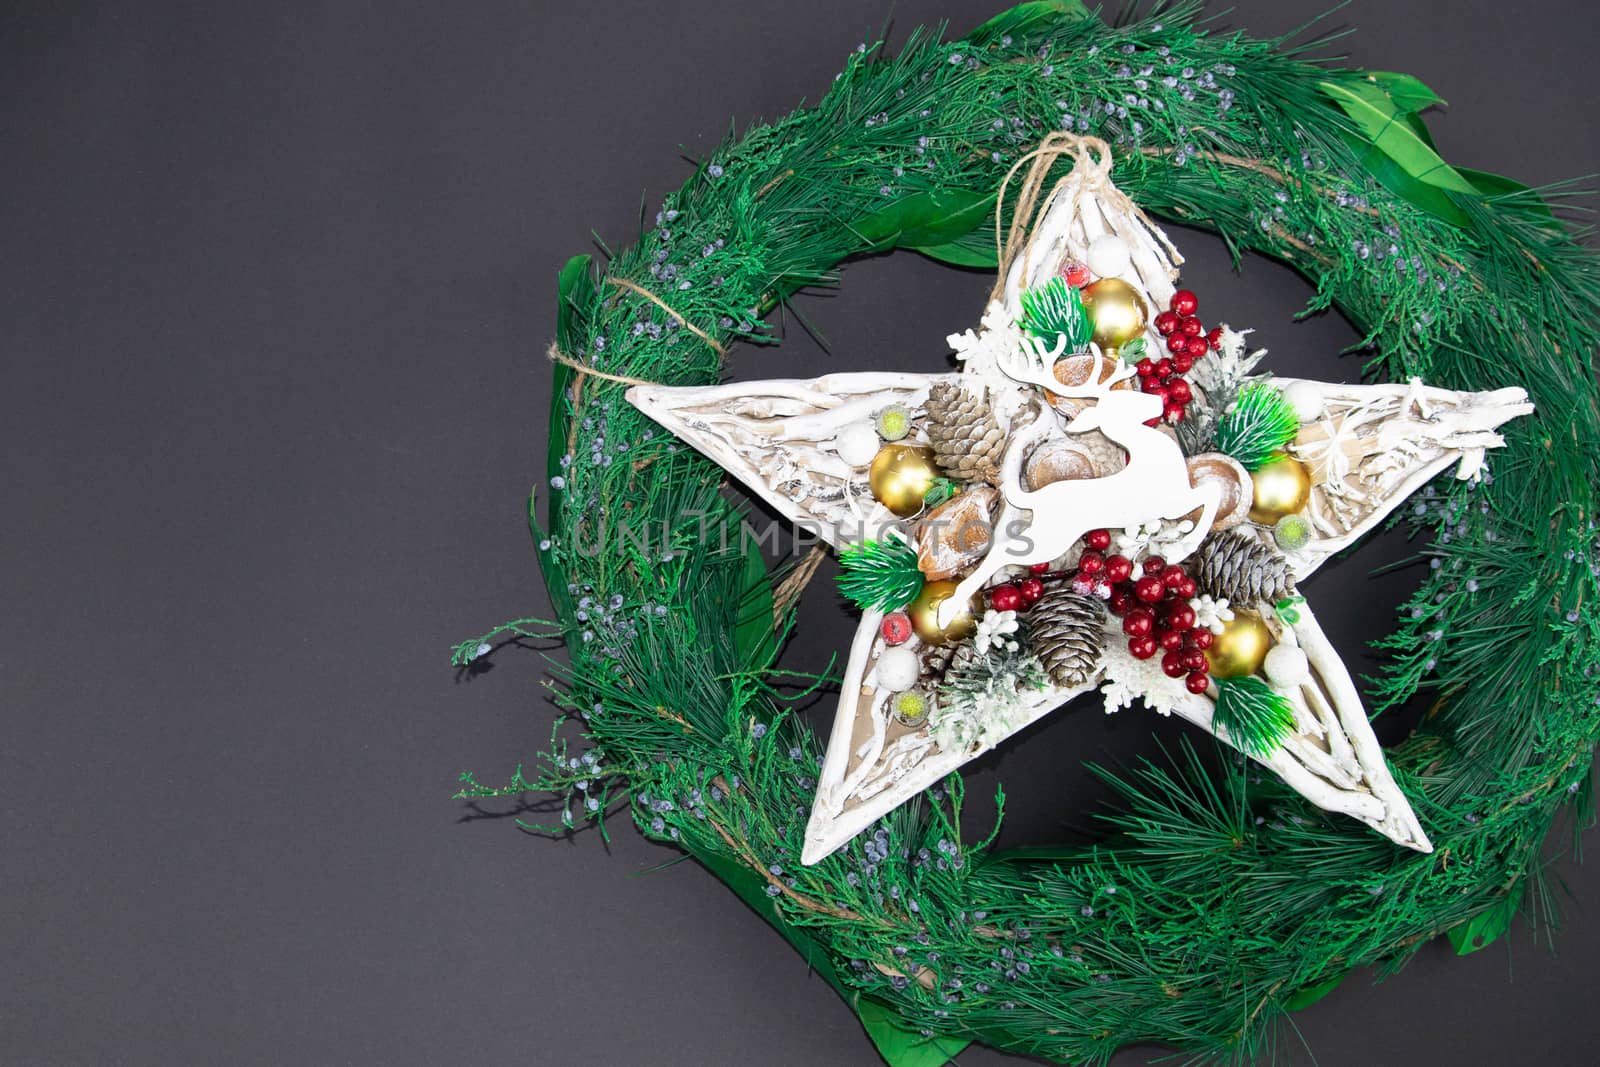 Christmas wreath with handmade star and deer, with left free part for text